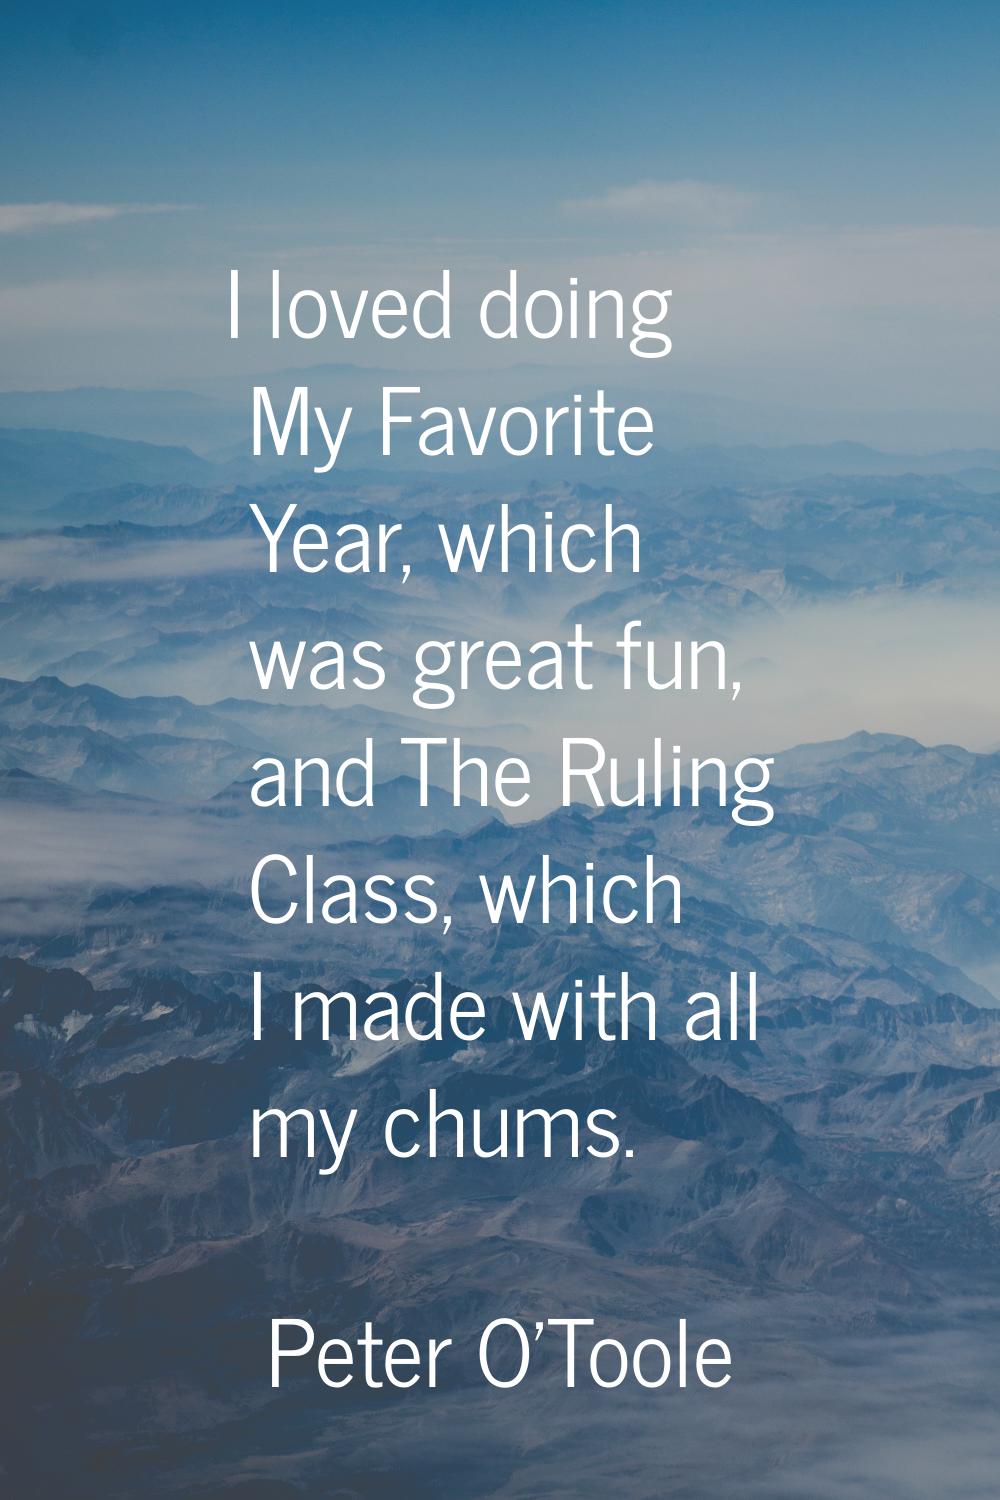 I loved doing My Favorite Year, which was great fun, and The Ruling Class, which I made with all my